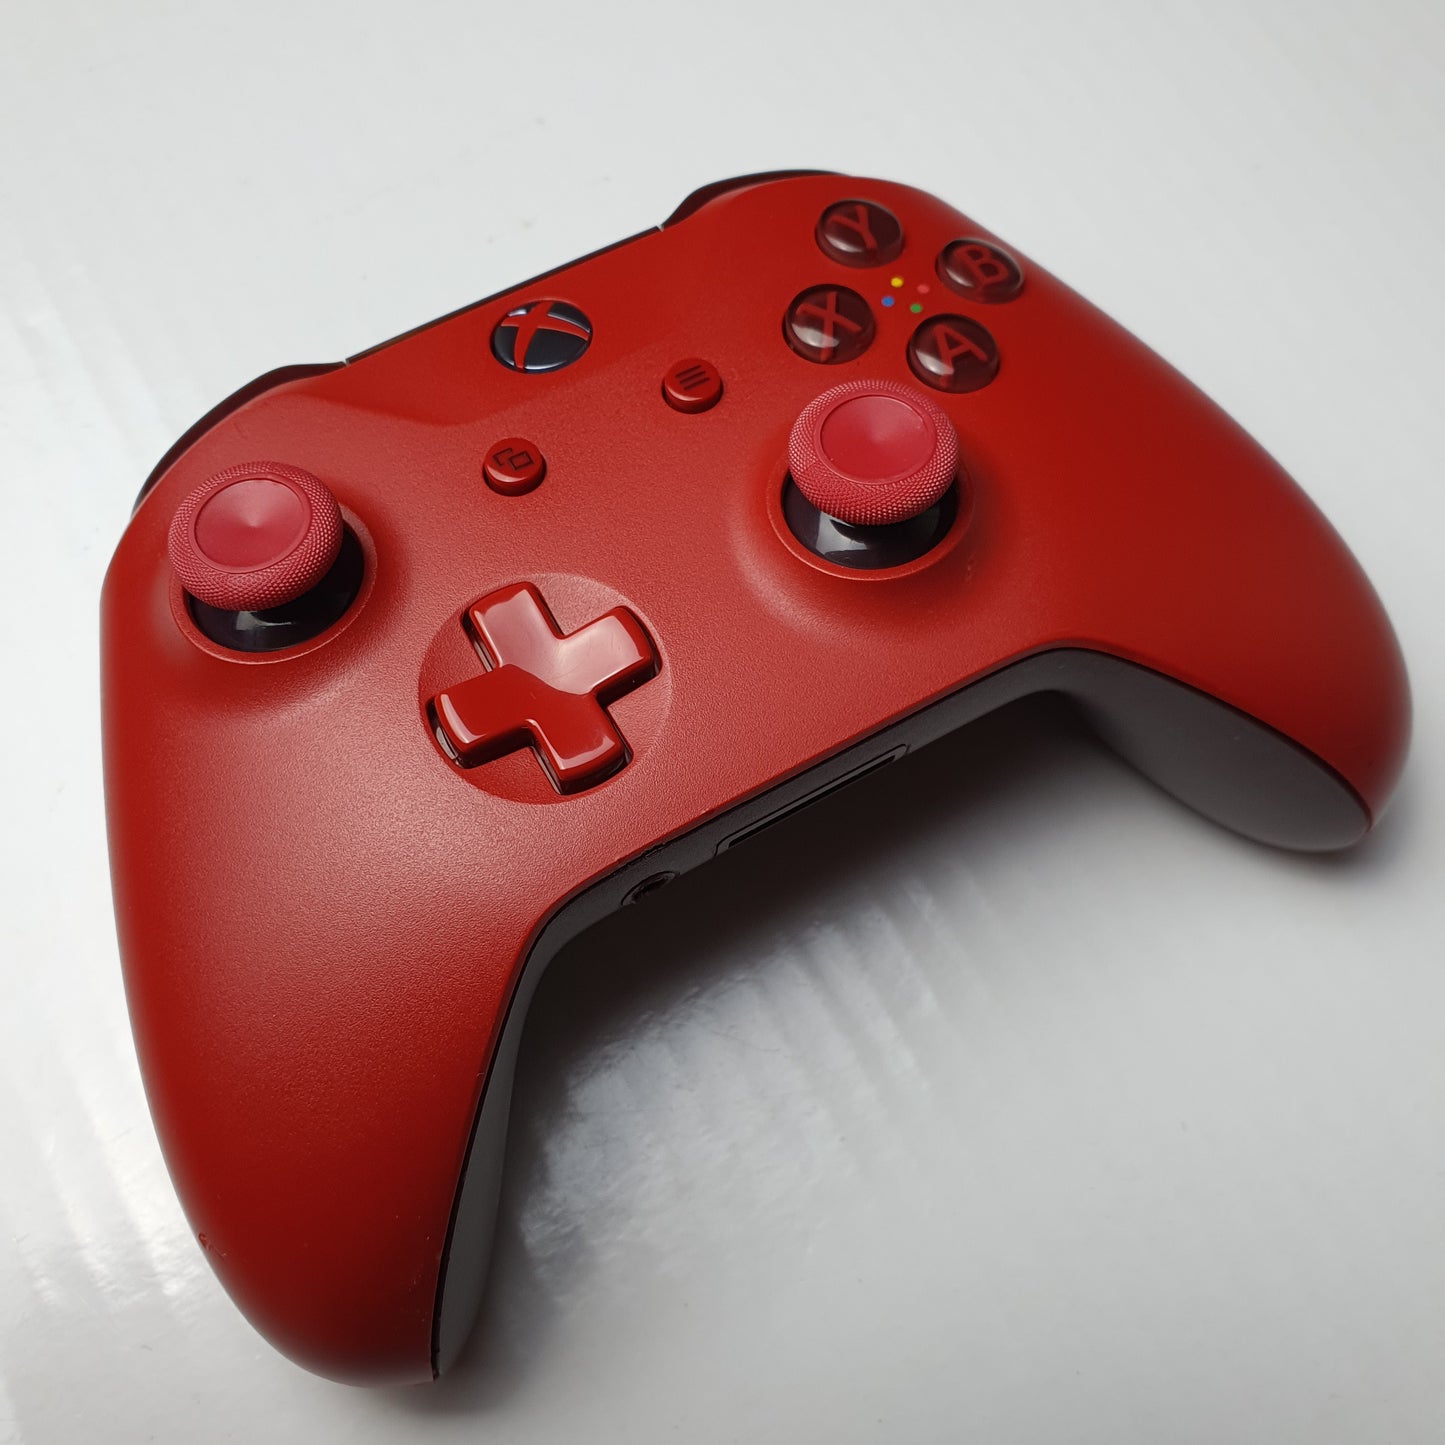 Official Microsoft Xbox Wireless Bluetooth Controller Red 1708